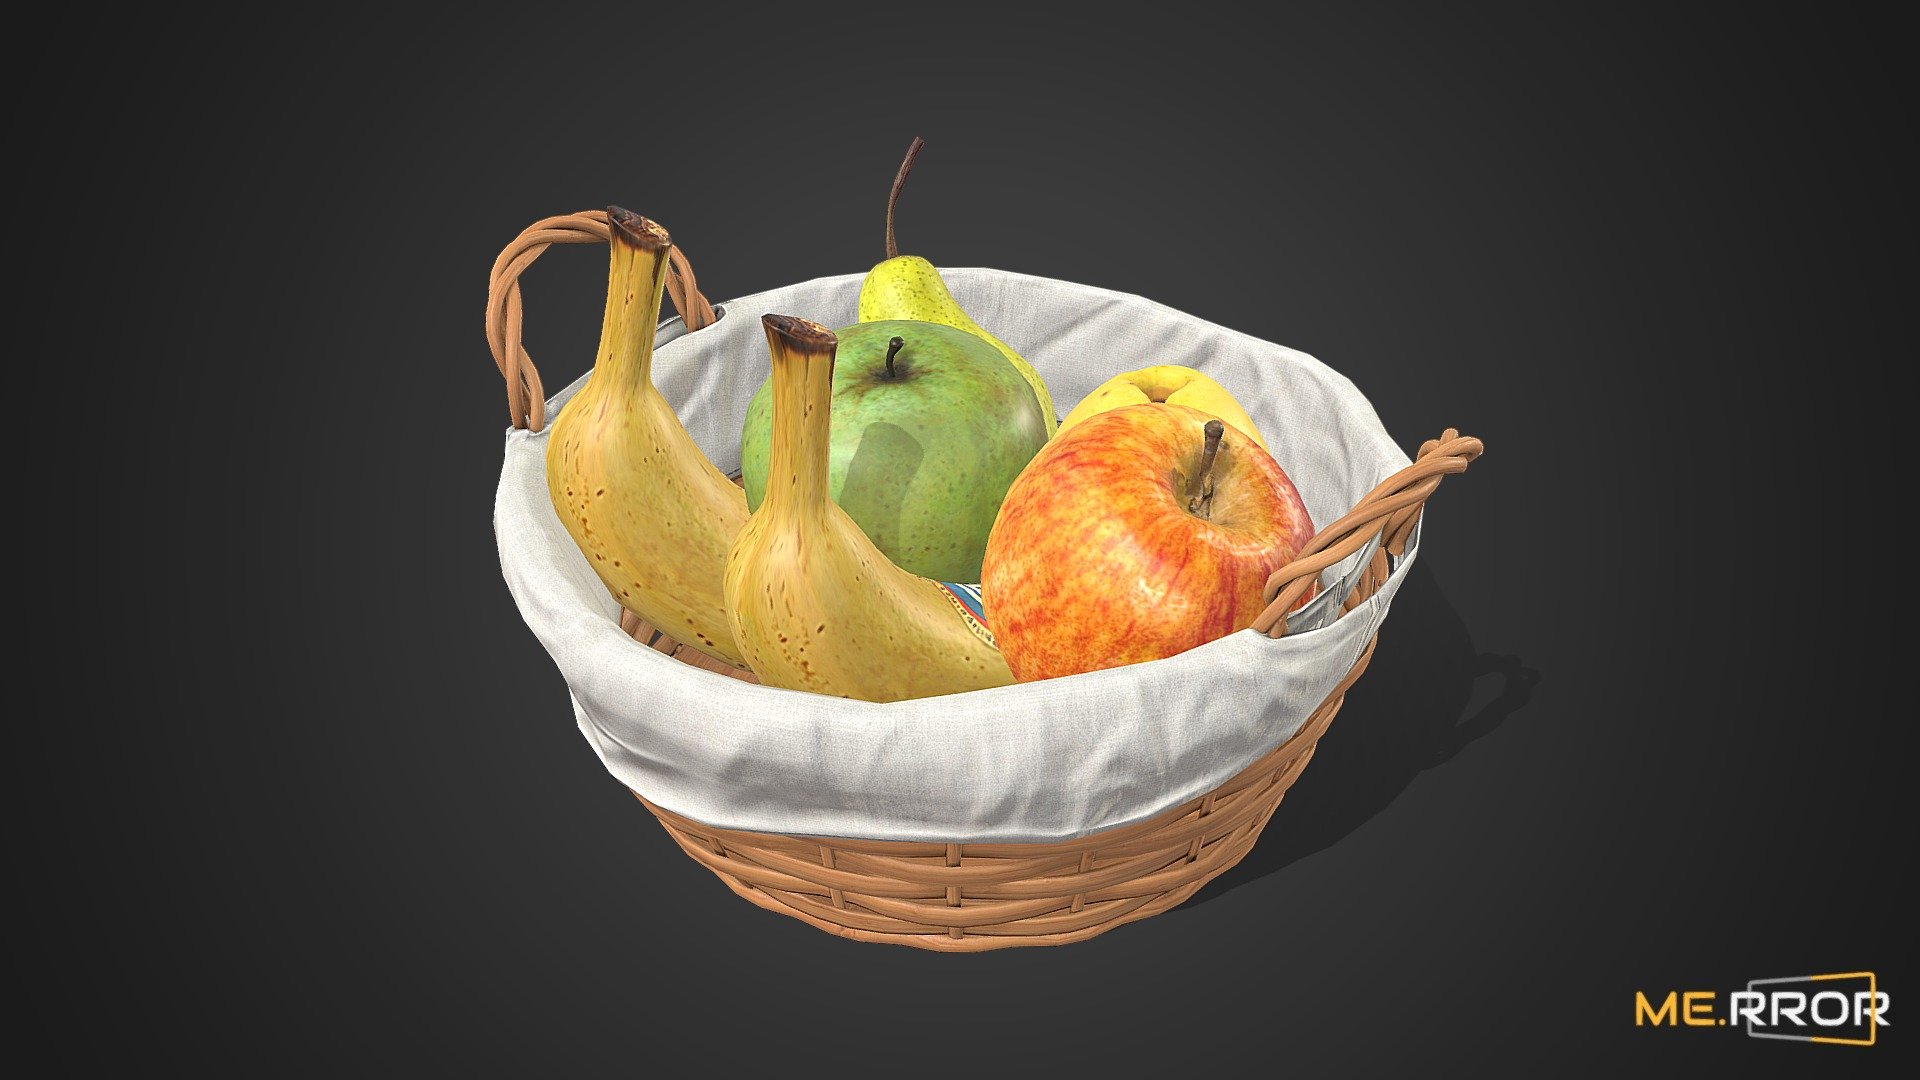 MERROR is a 3D Content PLATFORM which introduces various Asian assets to the 3D world


3DScanning #Photogrametry #ME.RROR - [Game-Ready] Fruit and Rattan Basket - Buy Royalty Free 3D model by ME.RROR Studio (@merror) 3d model